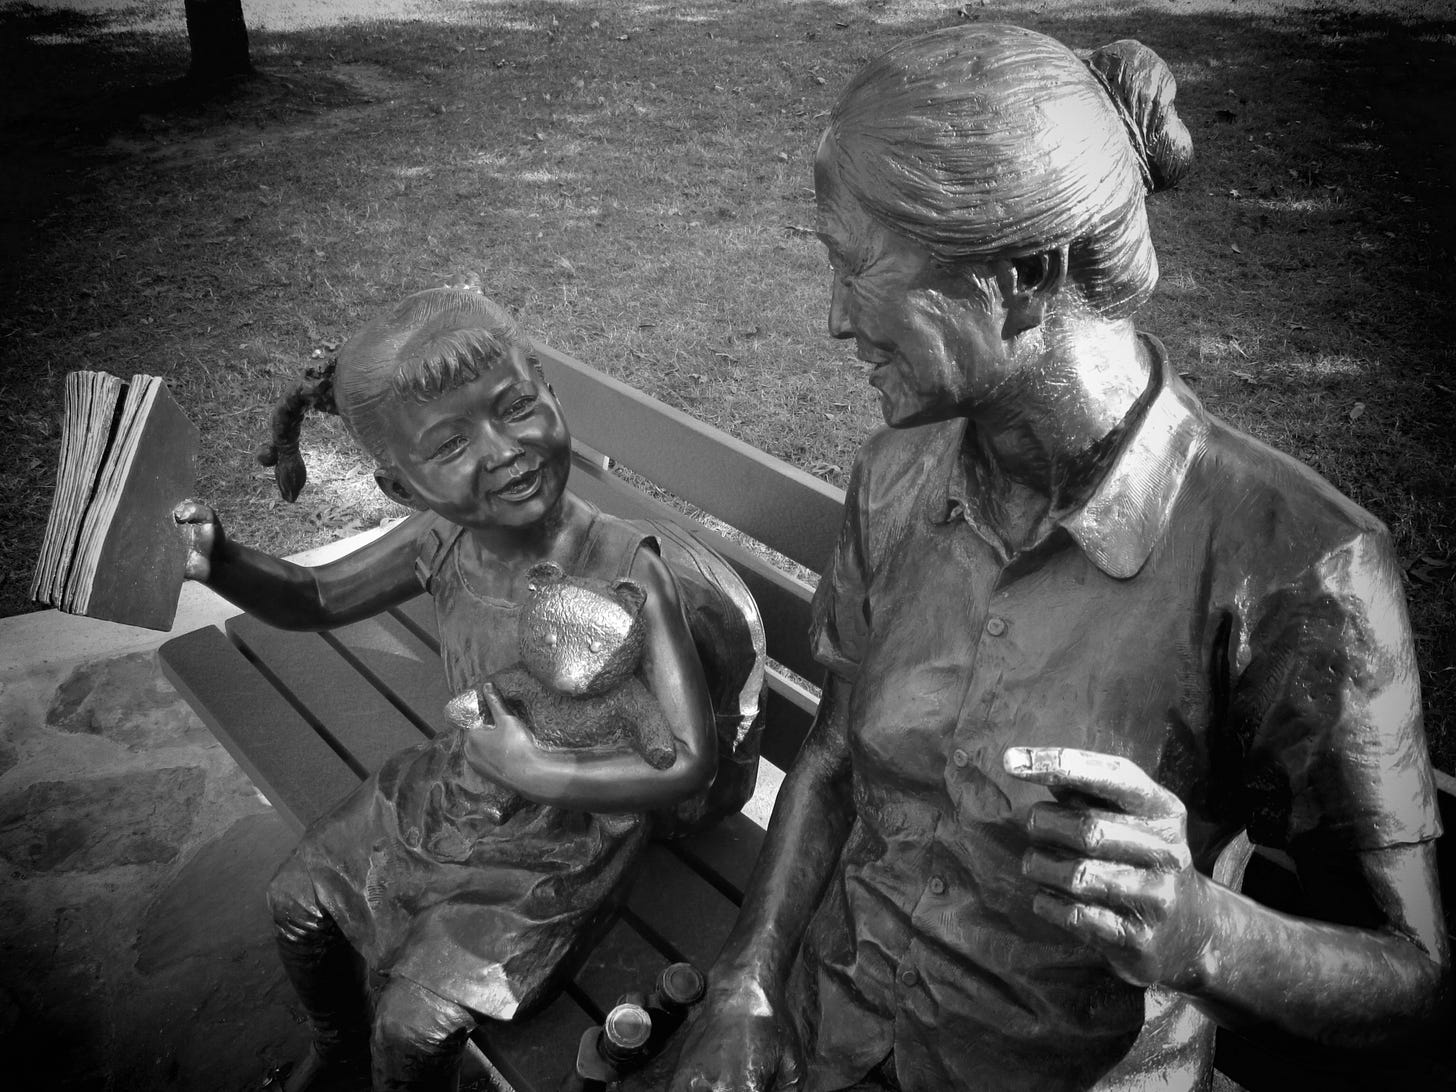 Photograph of bronze statue of grandmother and little girl on a park bench, looking at each other and smiling. The little girl is holding a book up. Statue in Sugar Land, Texas.